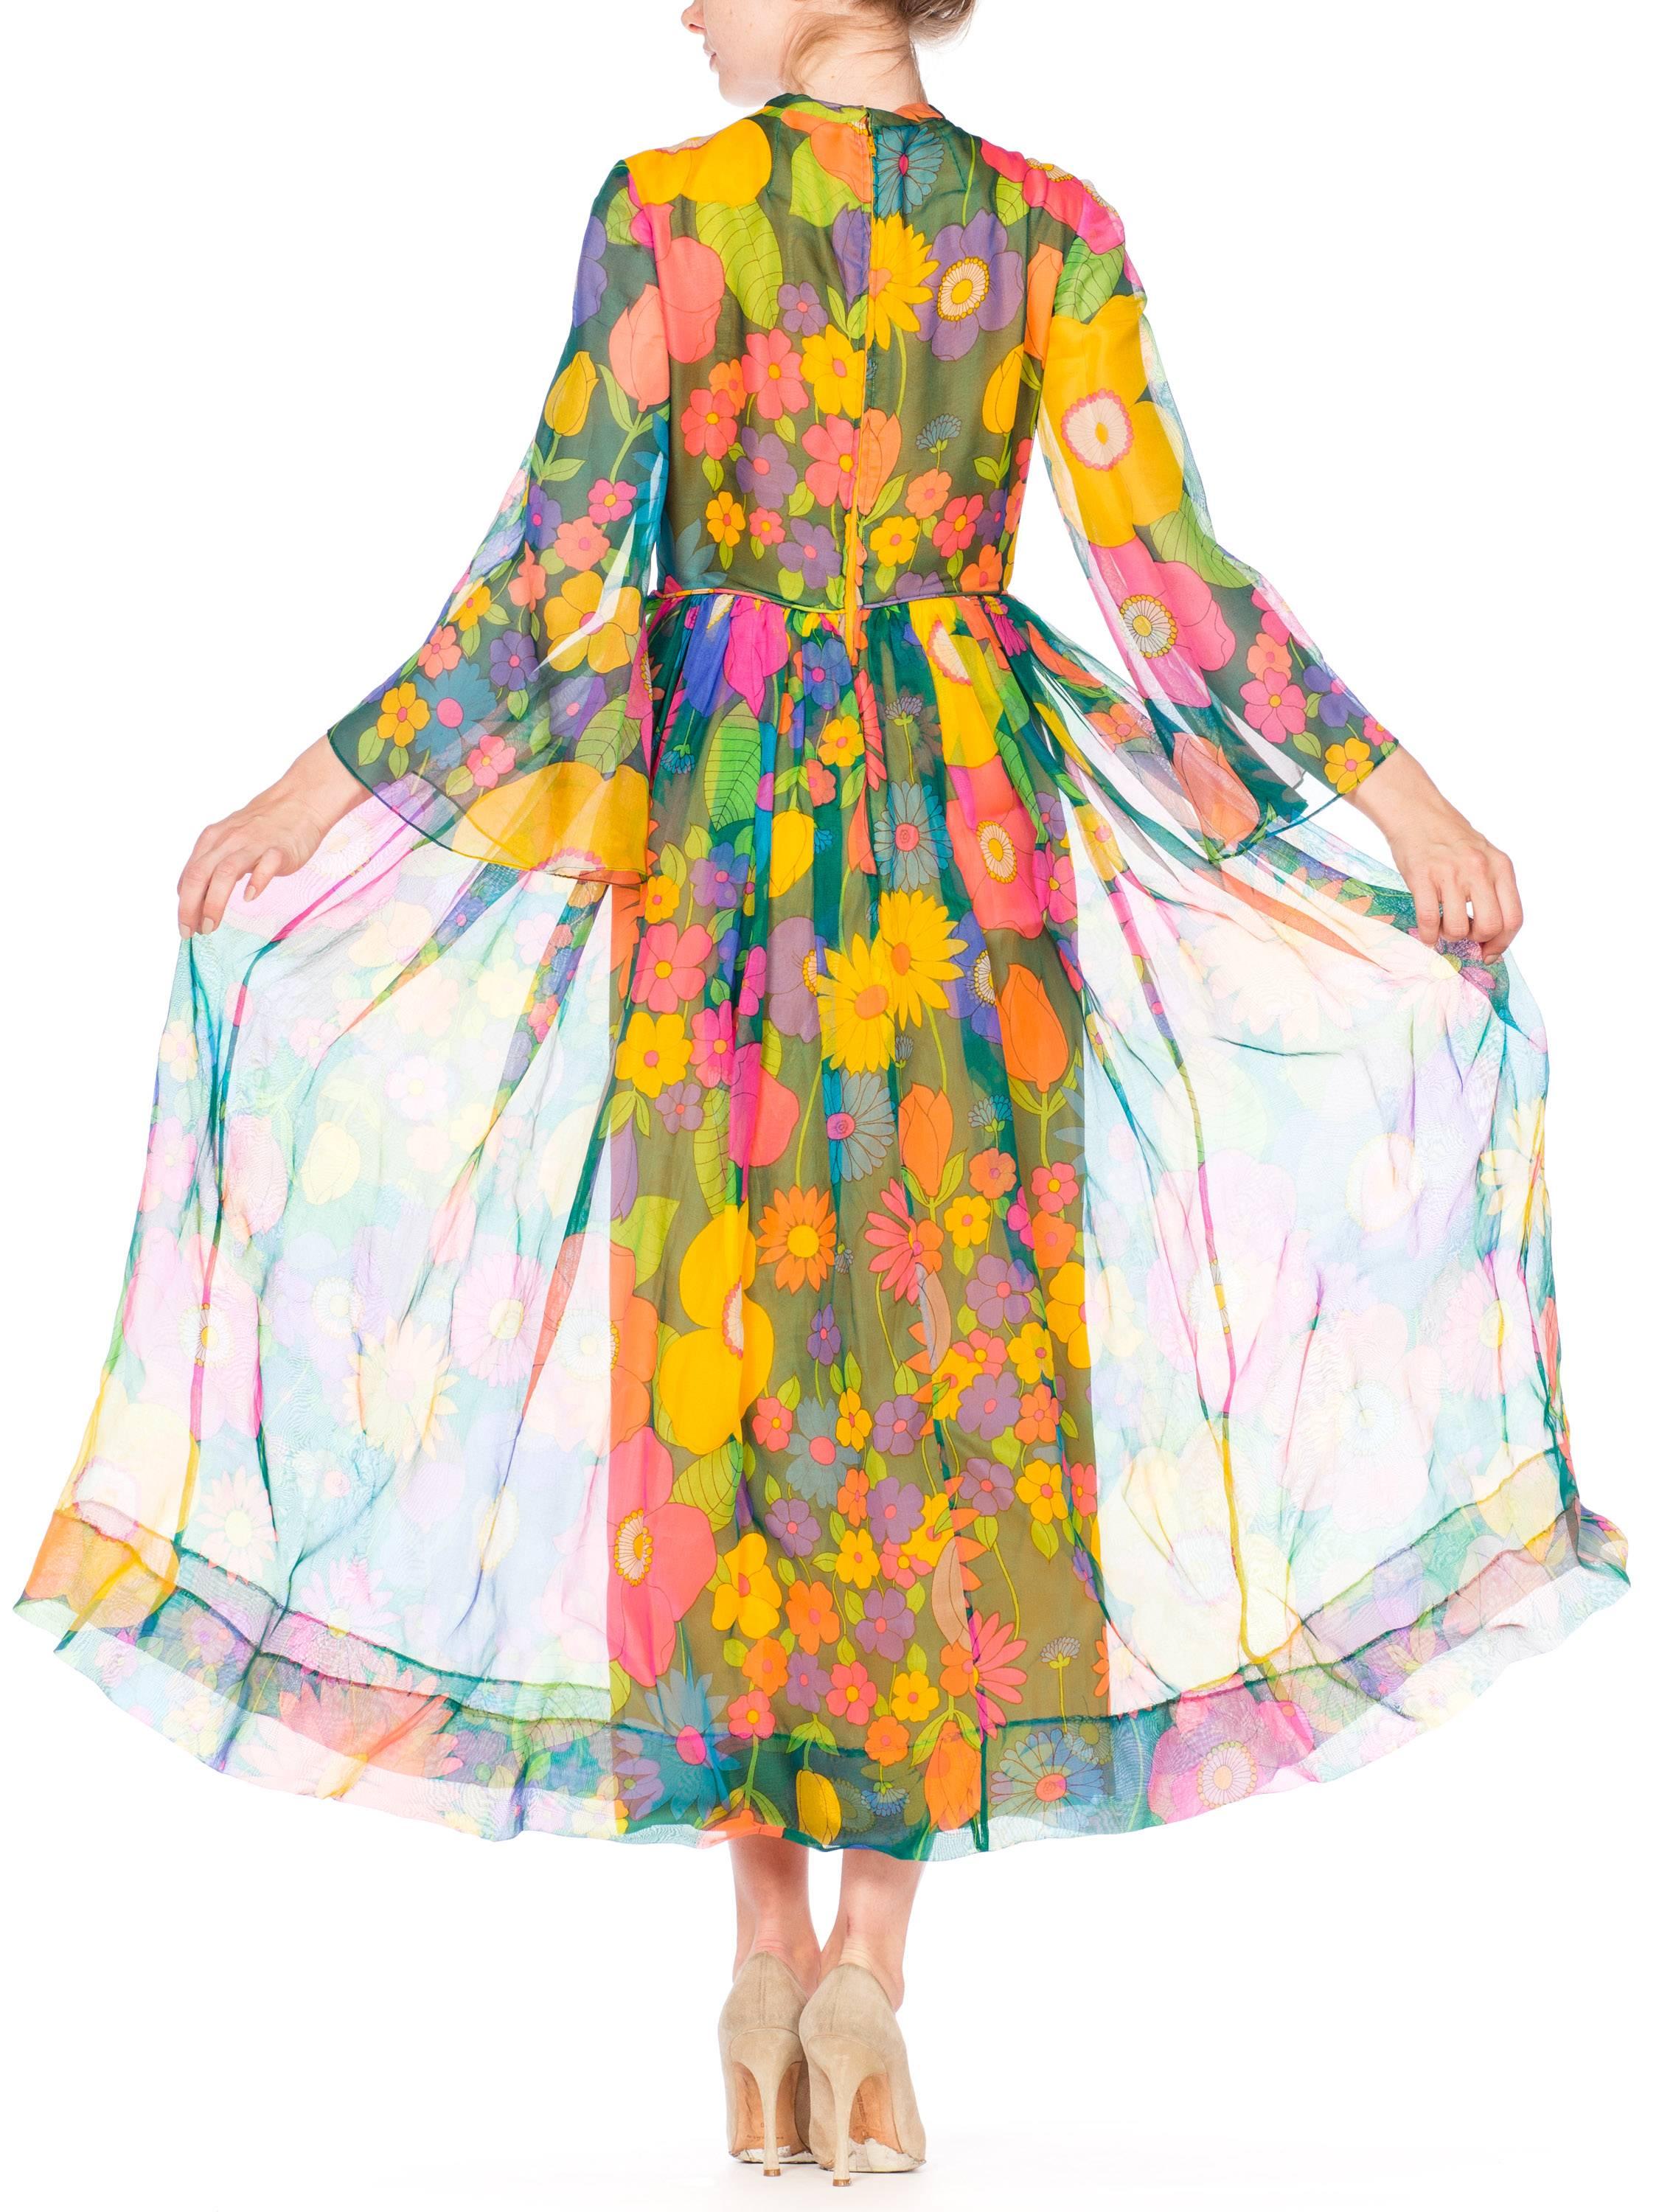 1960s 1970s Floral Print Dress with Bell Sleeves 4